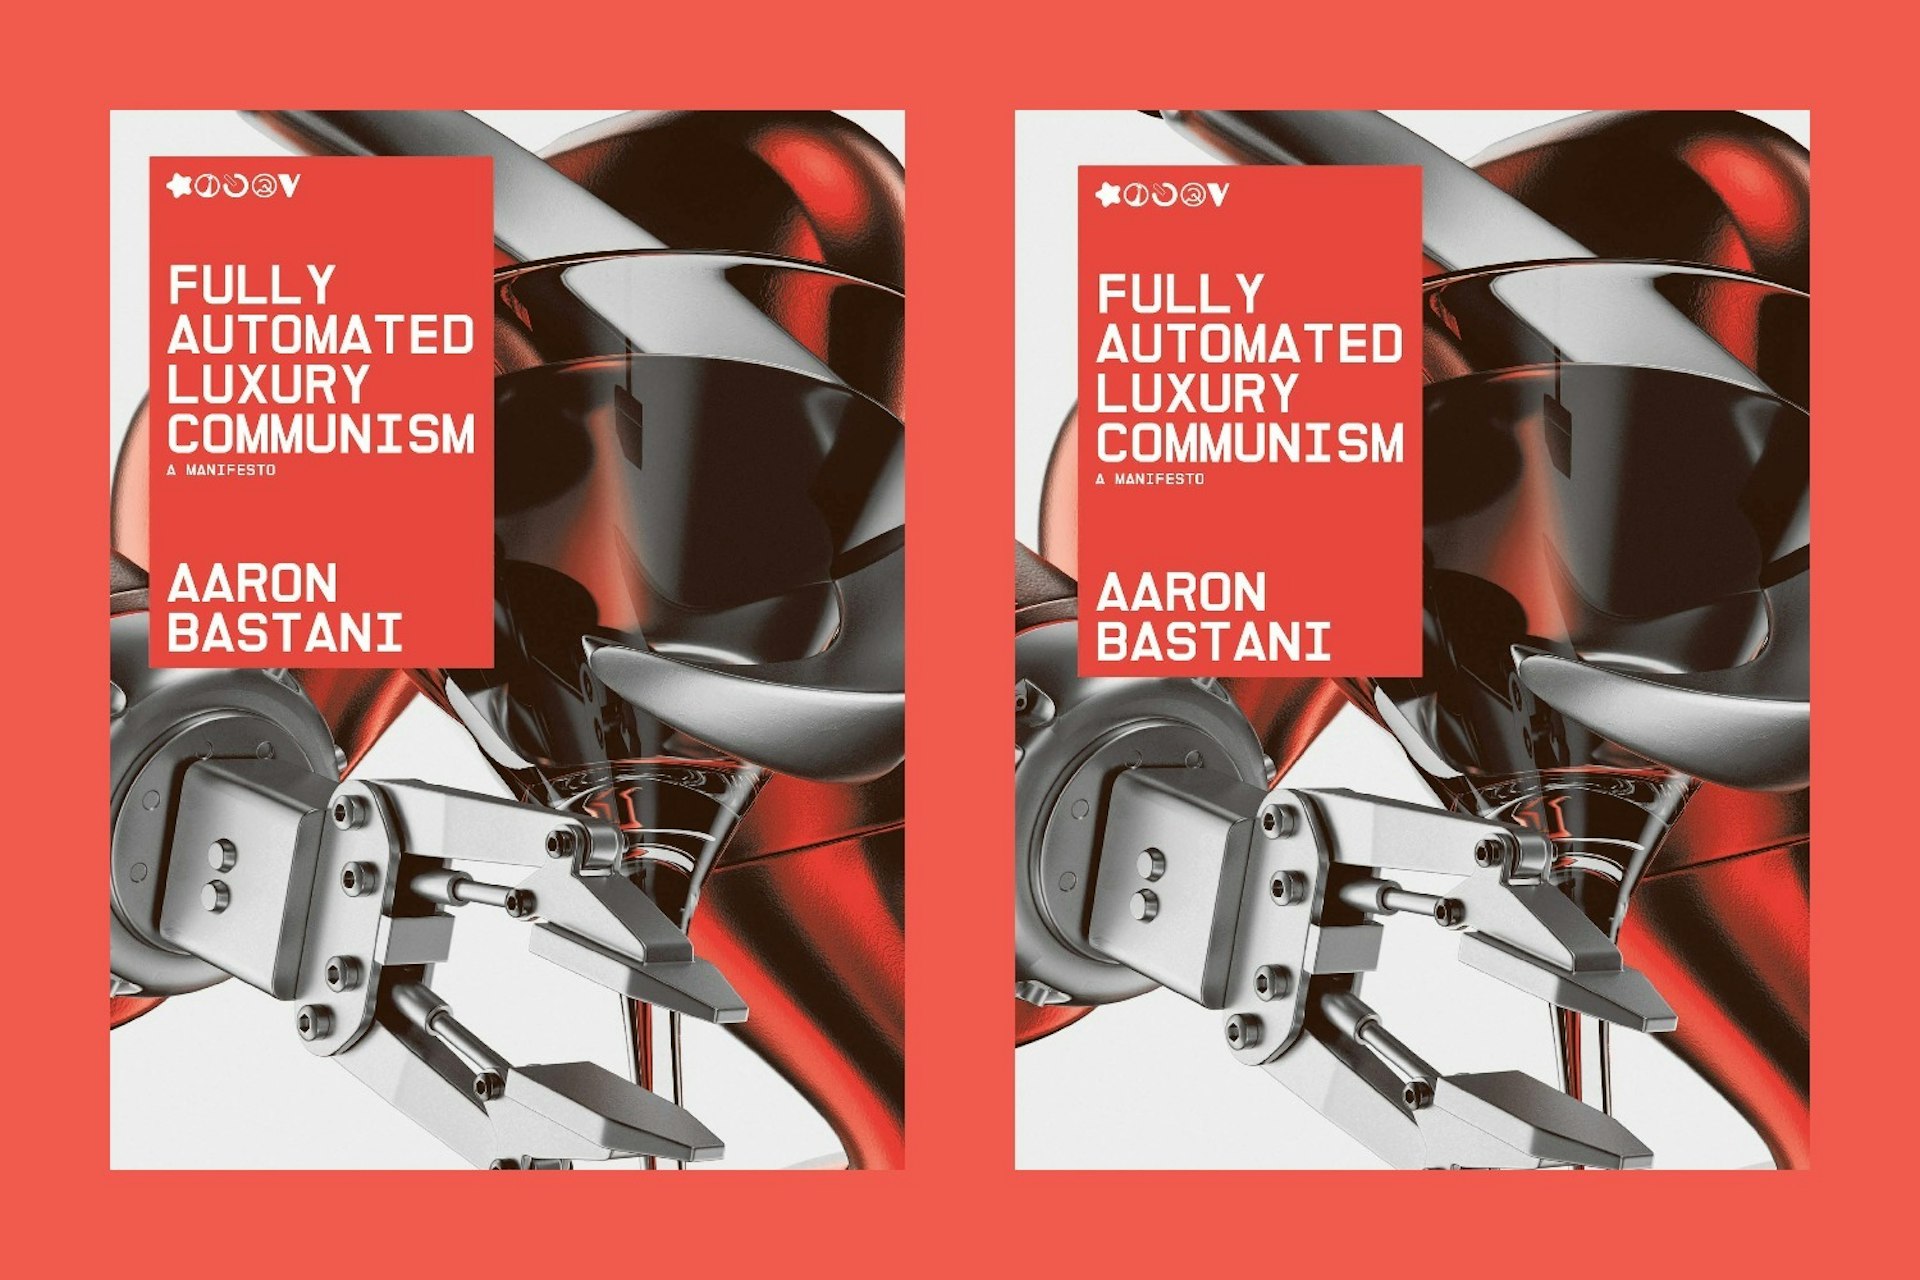 Could fully automated luxury communism ever work?